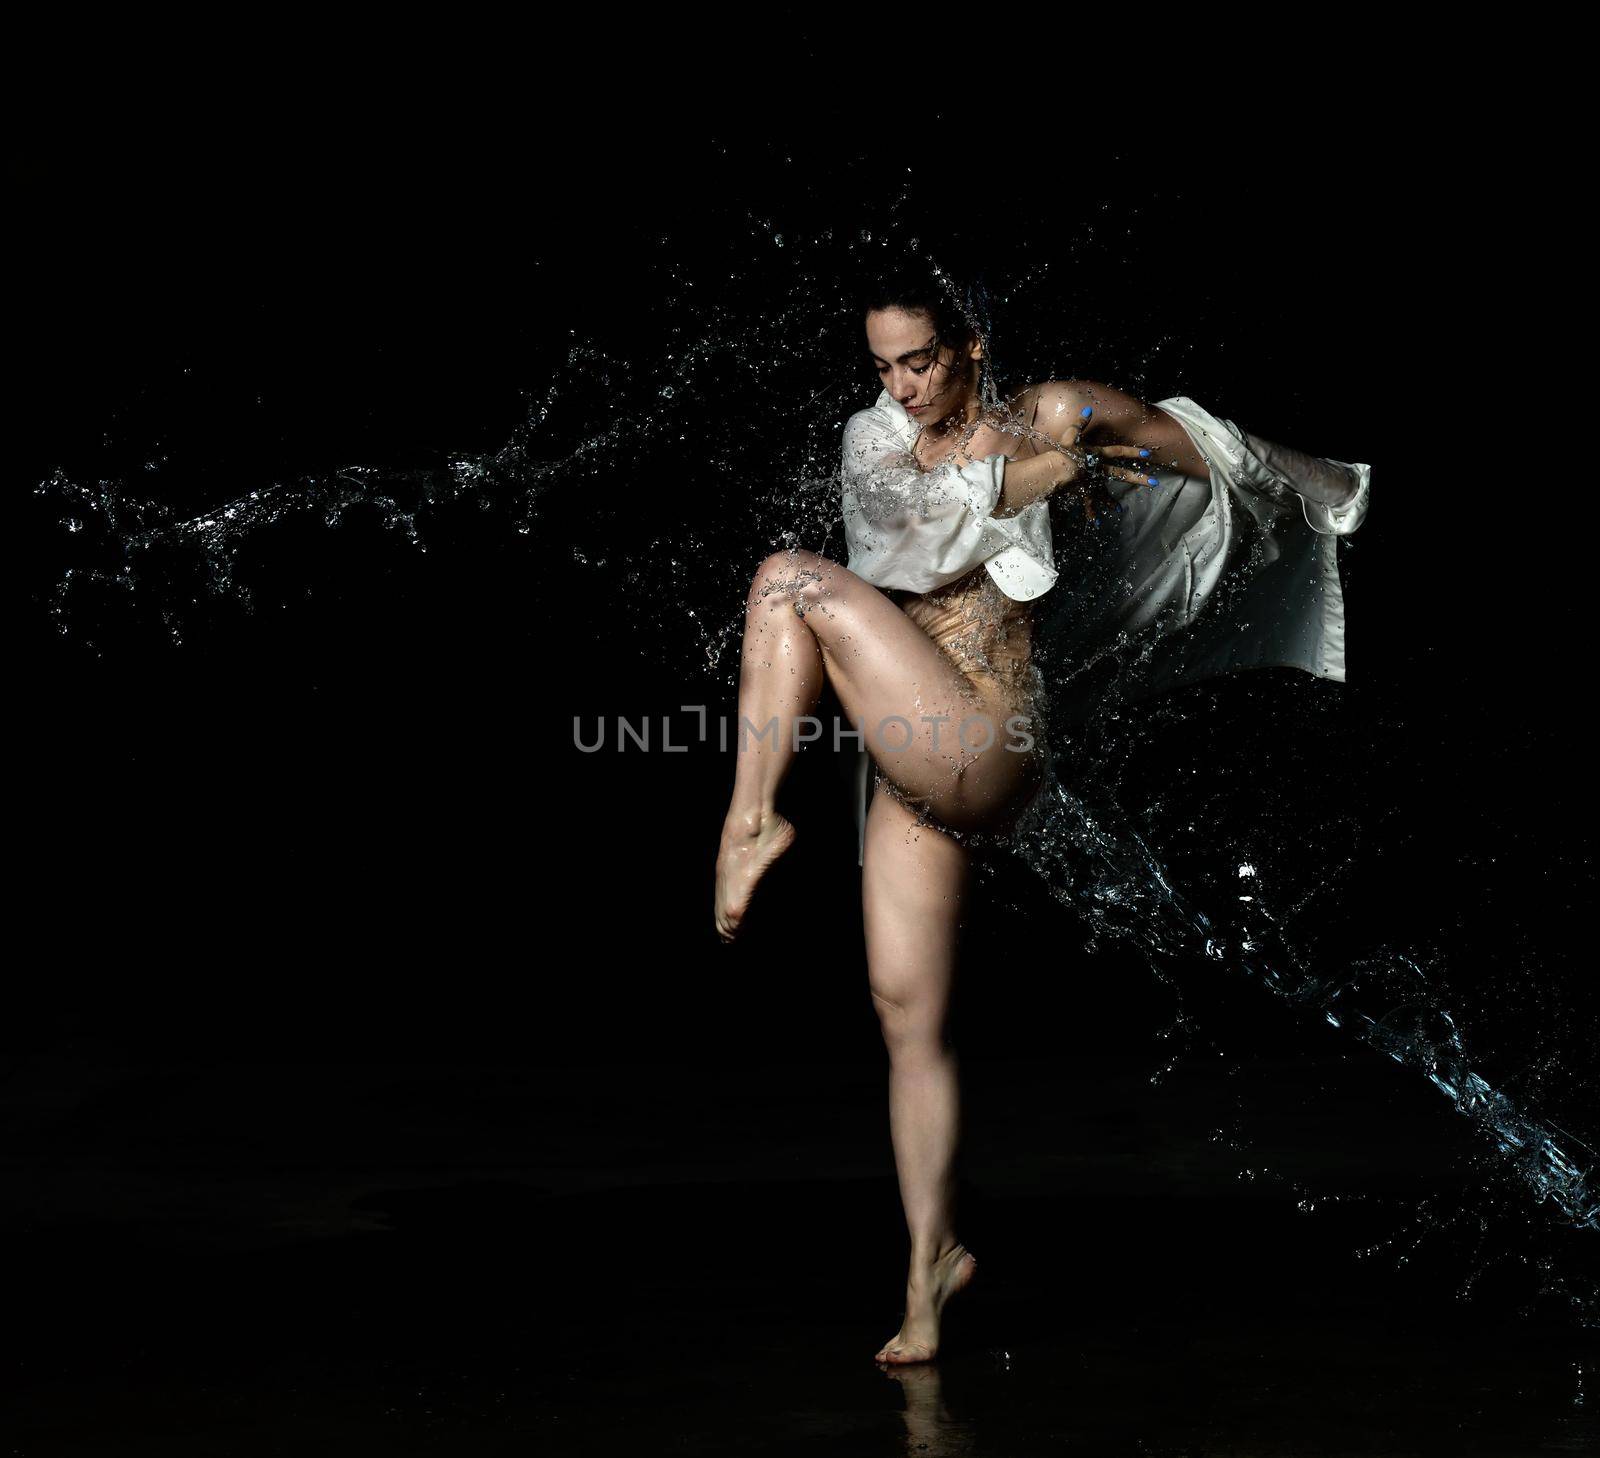 young beautiful woman of Caucasian appearance with long black hair is dancing in a white shirt in the rain on a black background. Sensual and expressive dance, jumping pose